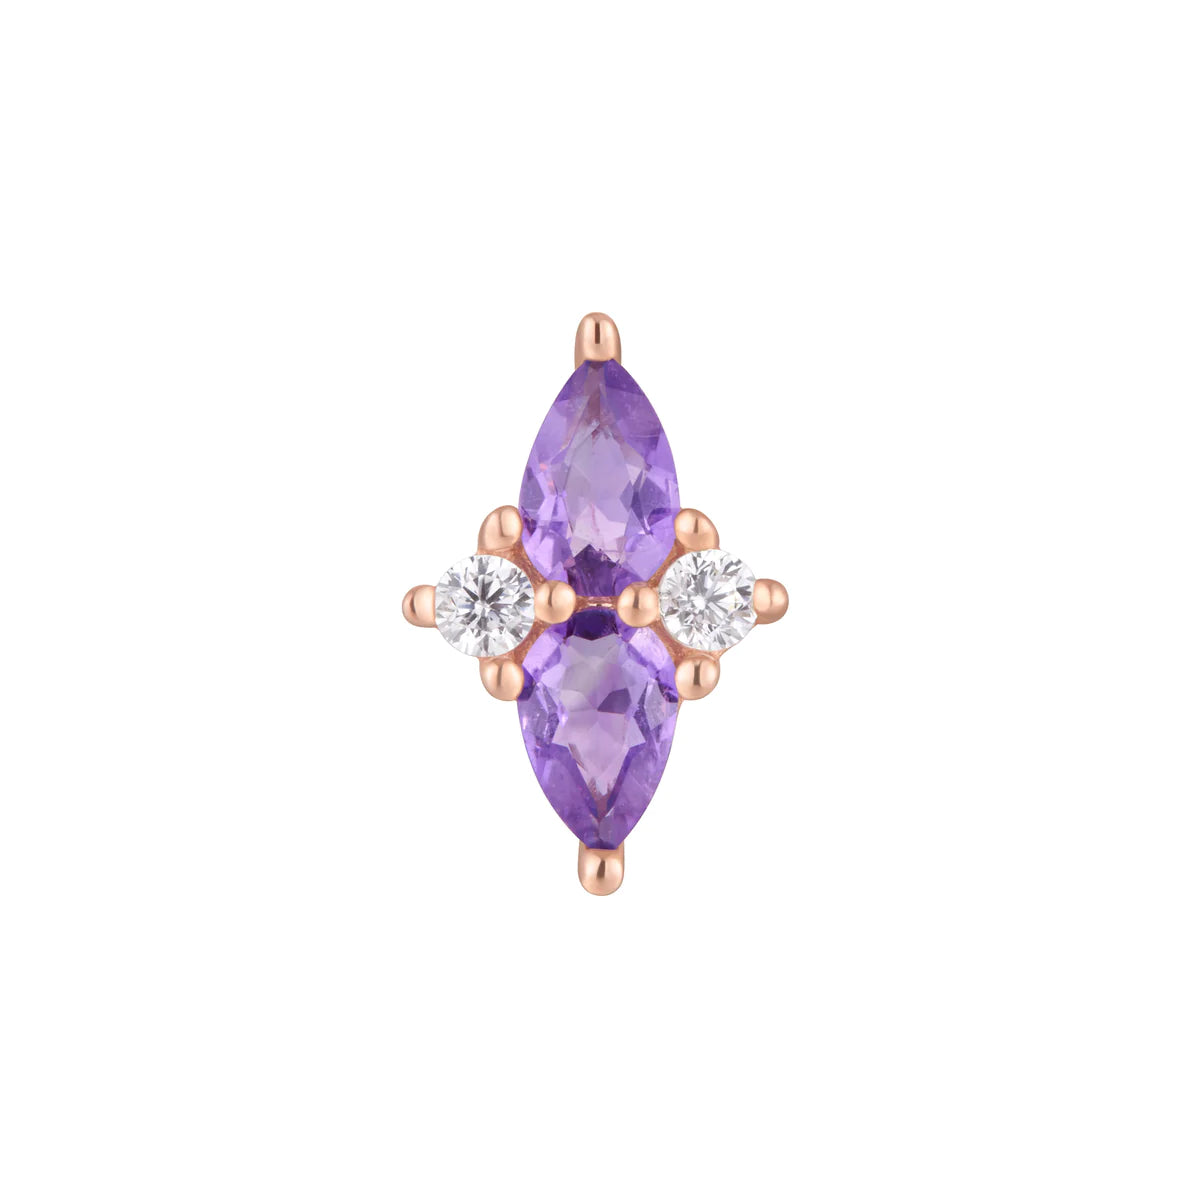 BUDDHA JEWELRY - ETHEREAL - AMETHYST + CZ - 14KT SOLID GOLD - THREADLESS END